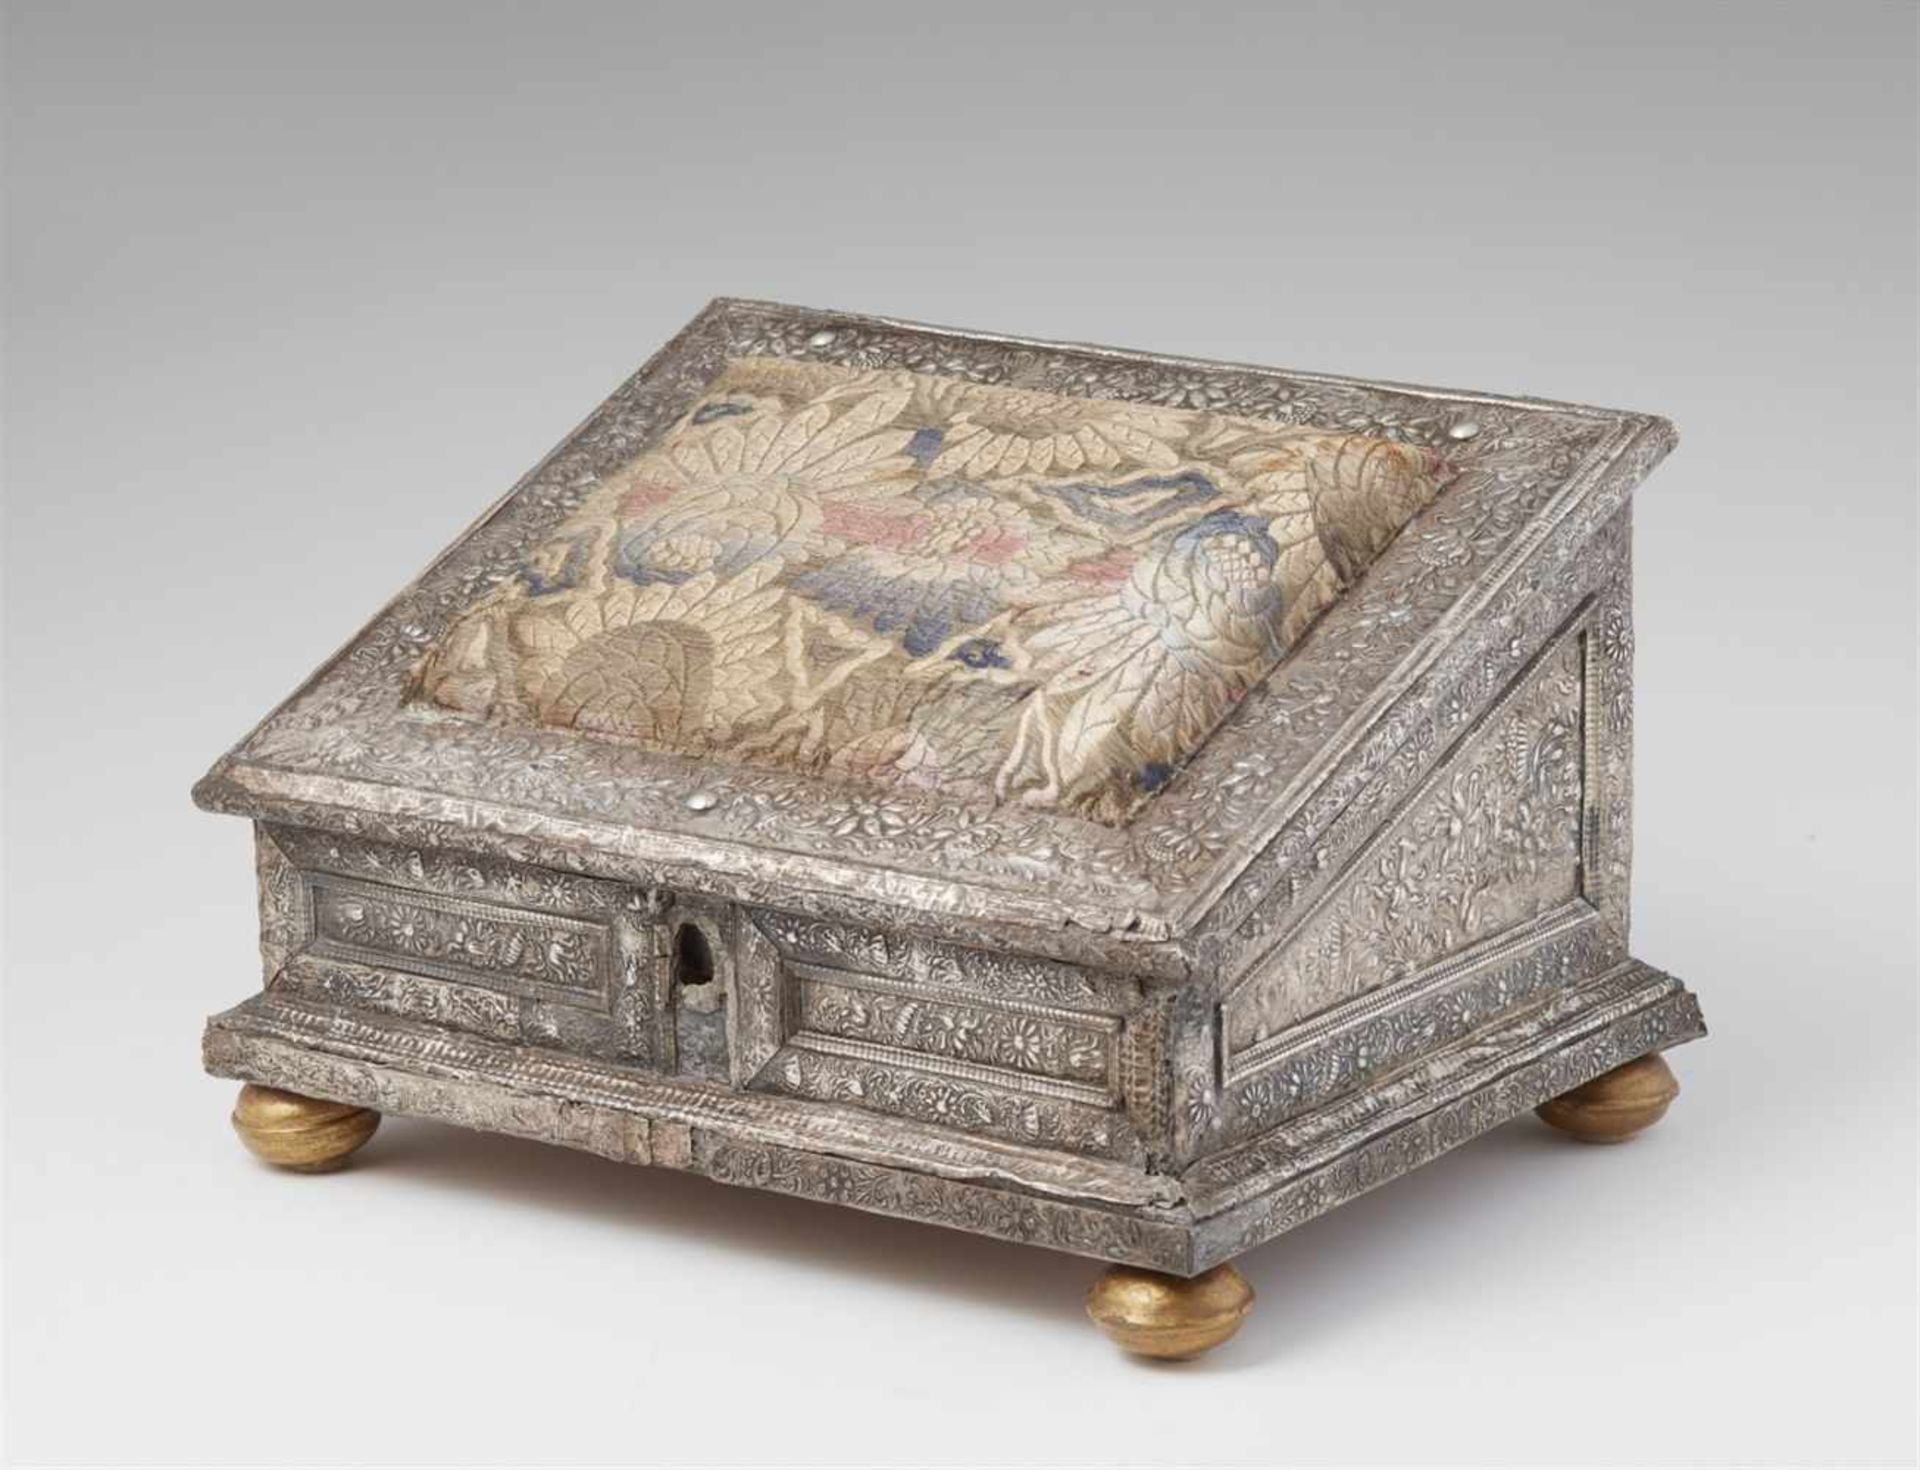 A Baroque silver sewing boxEmbossed silver, palisander and walnut veneer over wooden corpus. Lined